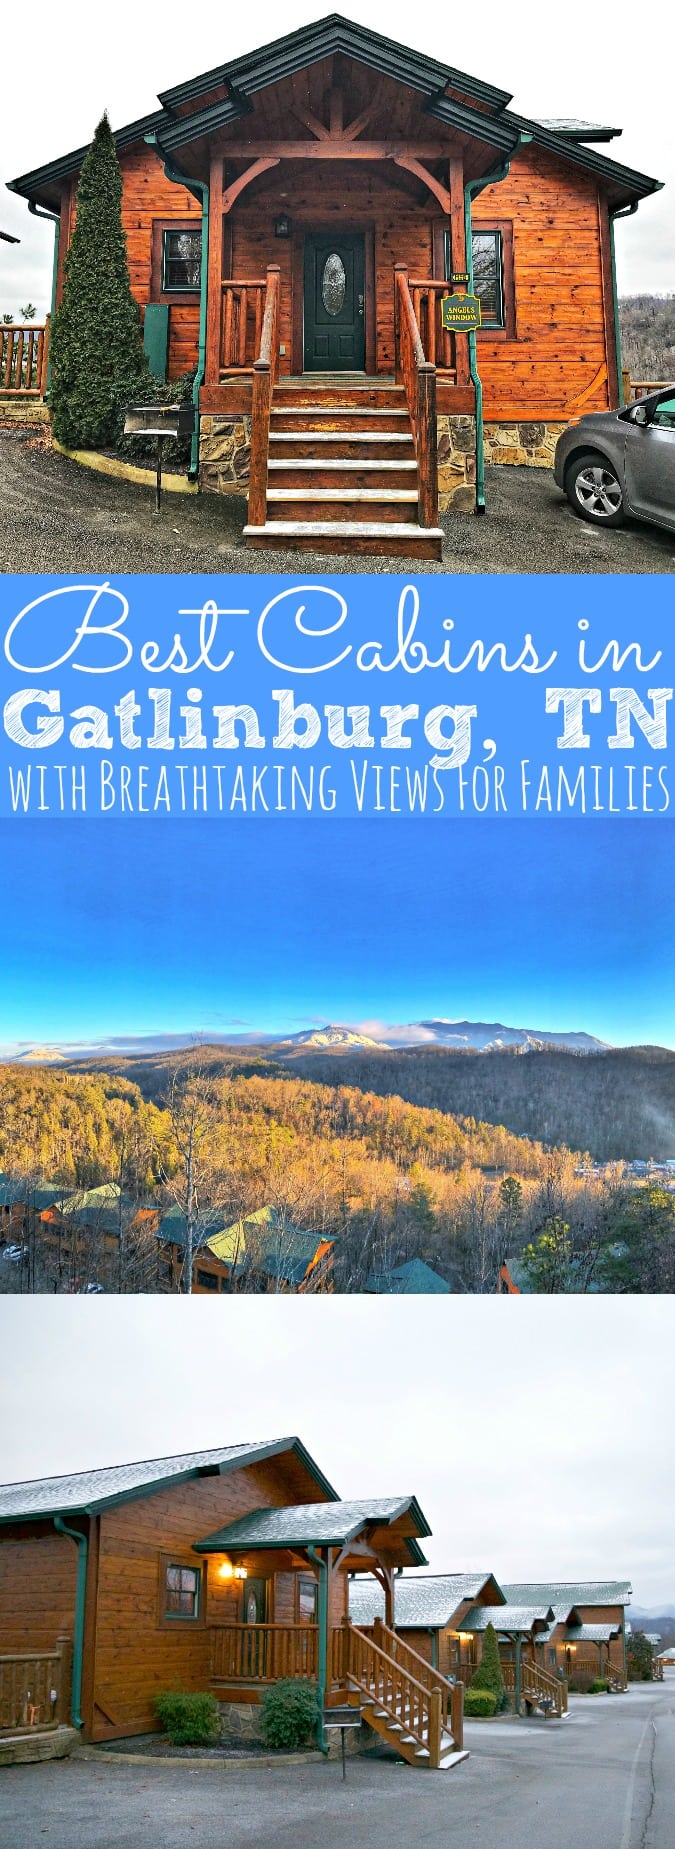 Best Cabins In Gatlinburg For Families With Breathtaking Views